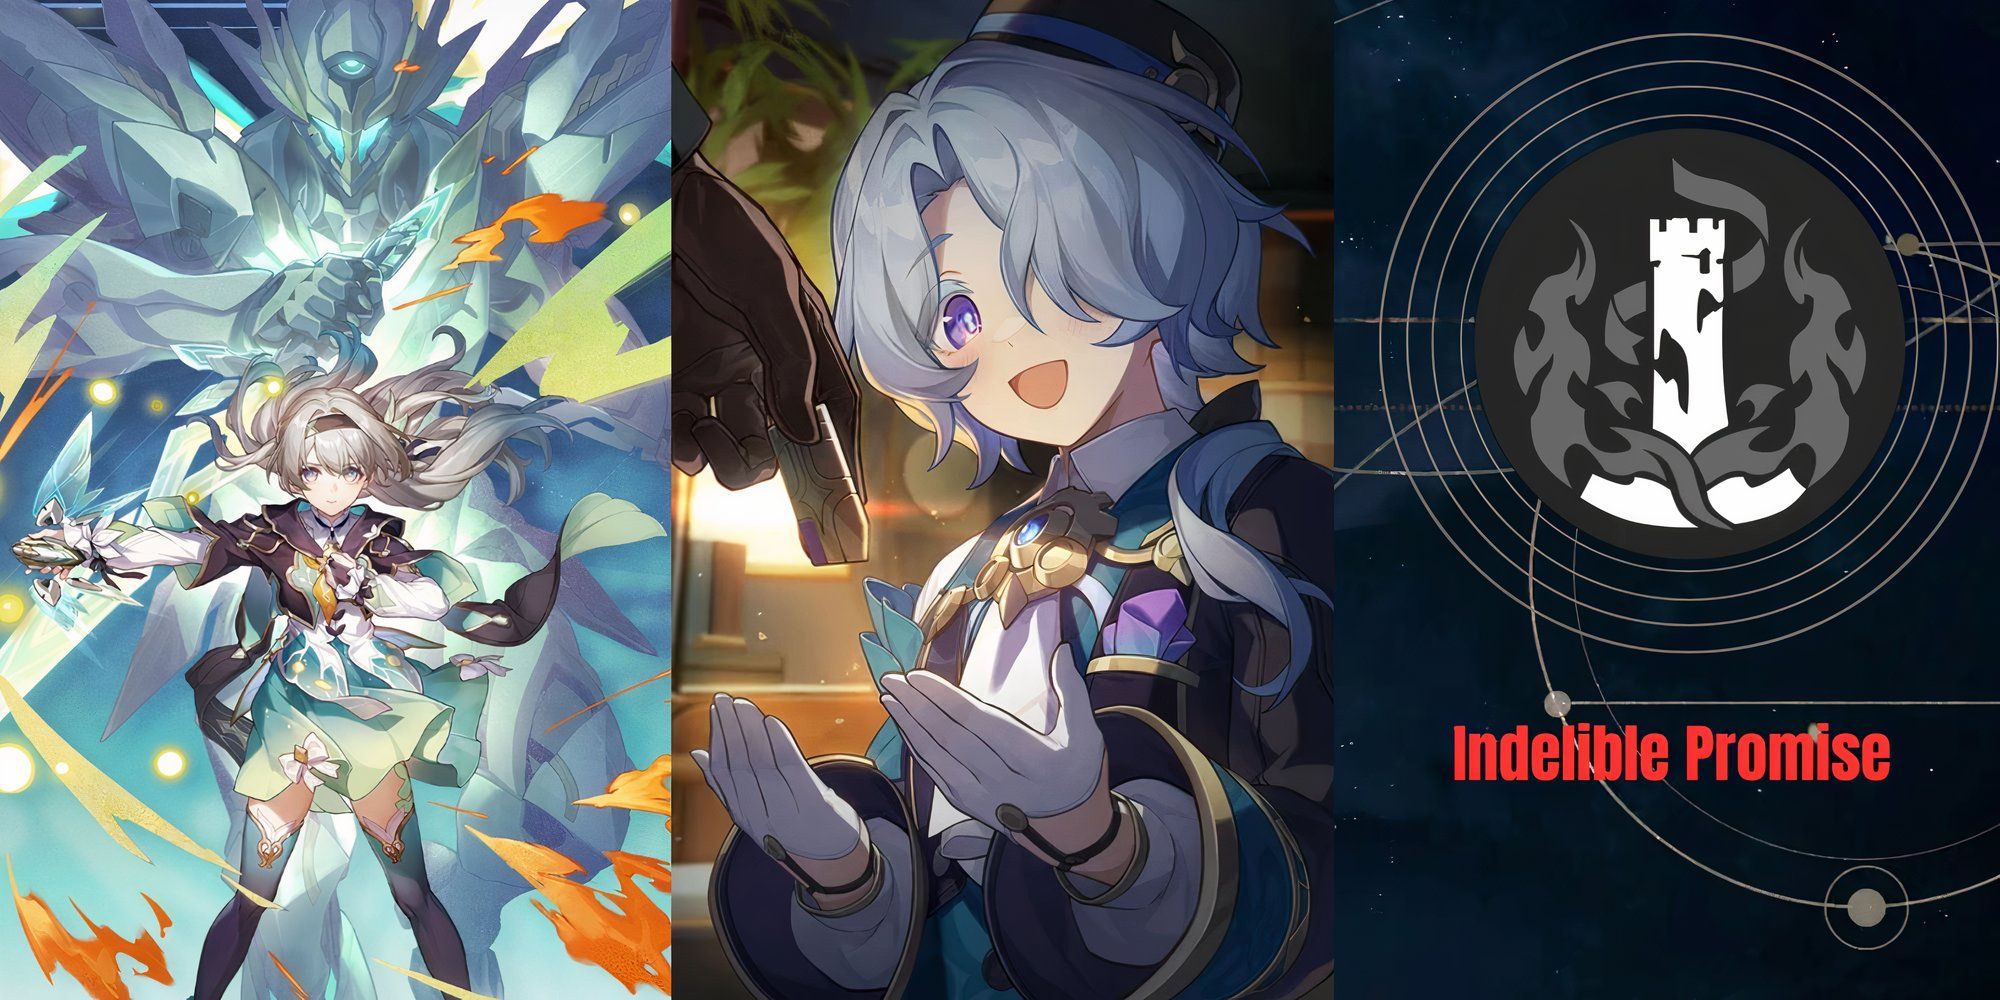 Honkai_ Star Rail – Firefly and Indelible Promise